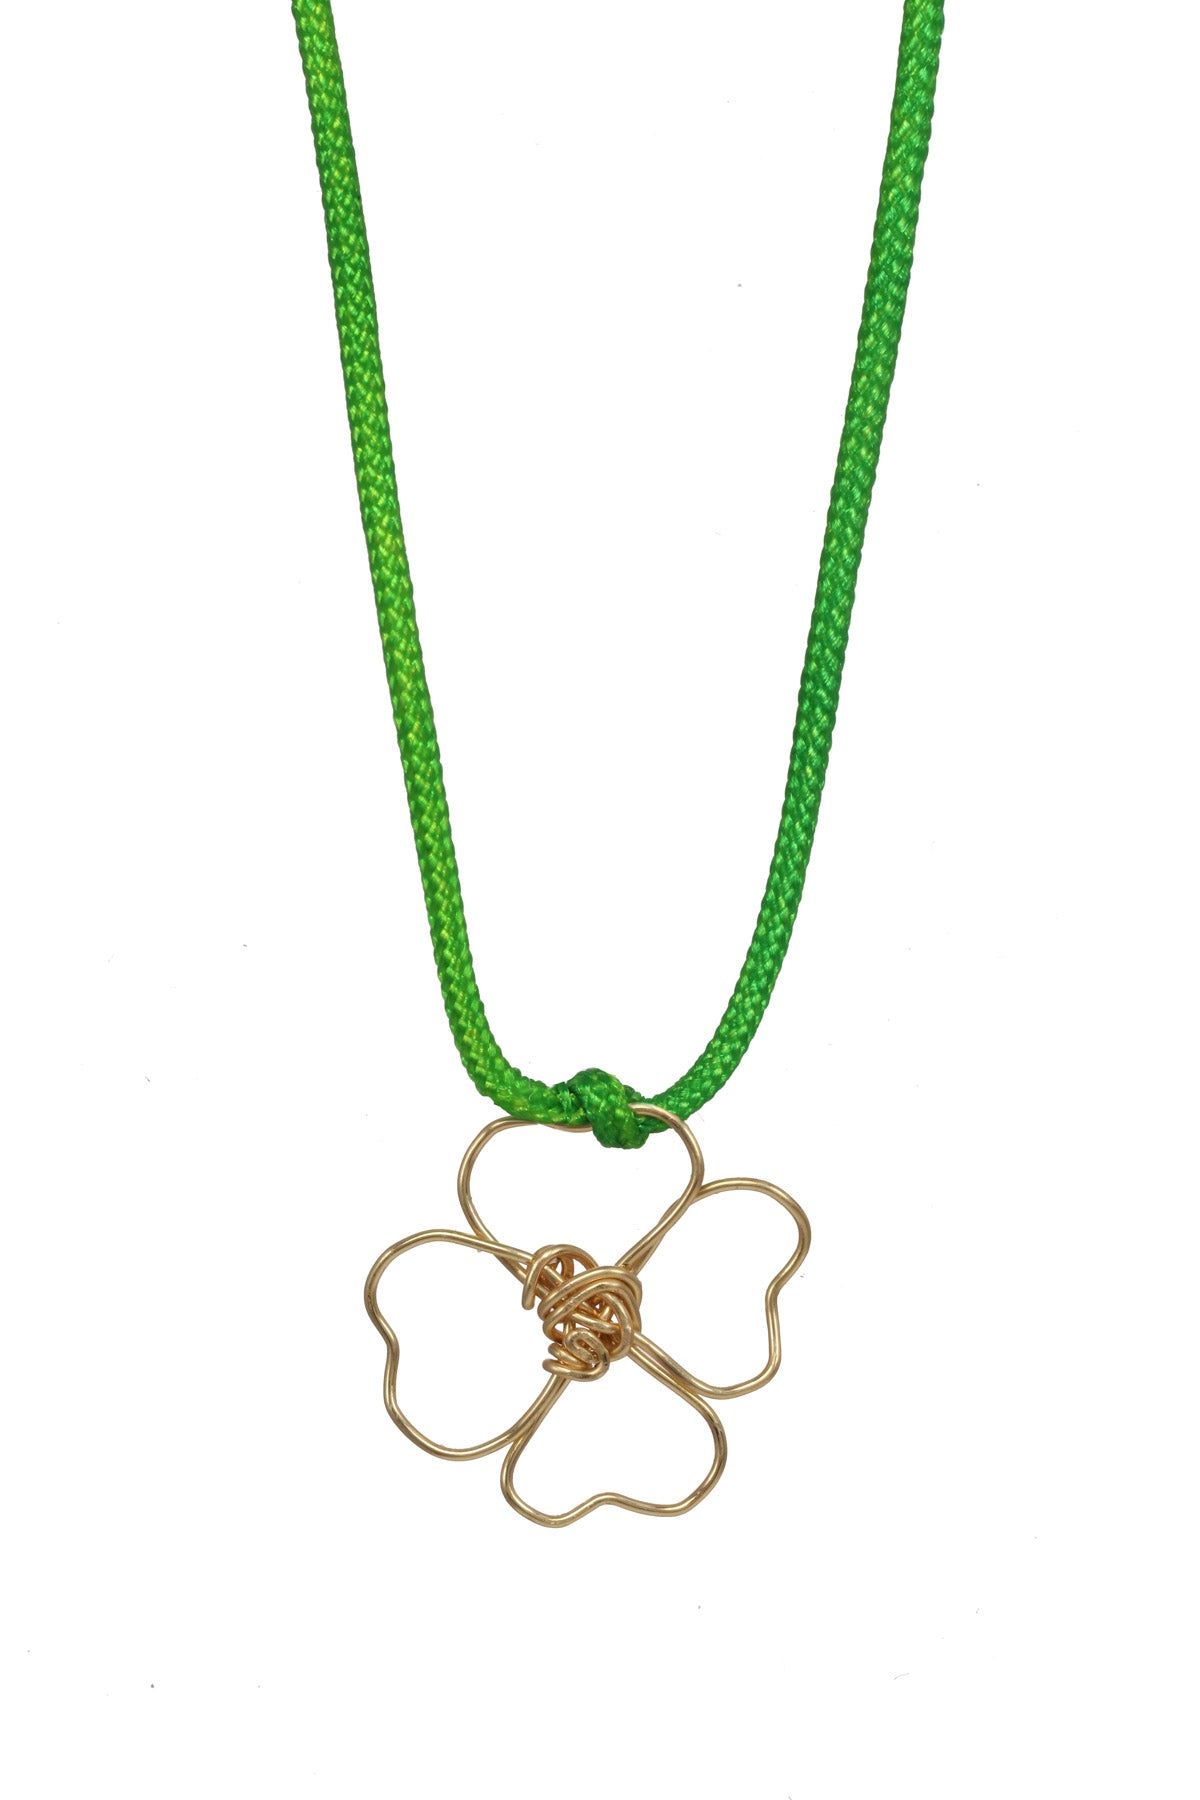 Gold on Green four leaf clover necklace – anne woodman jewelry design